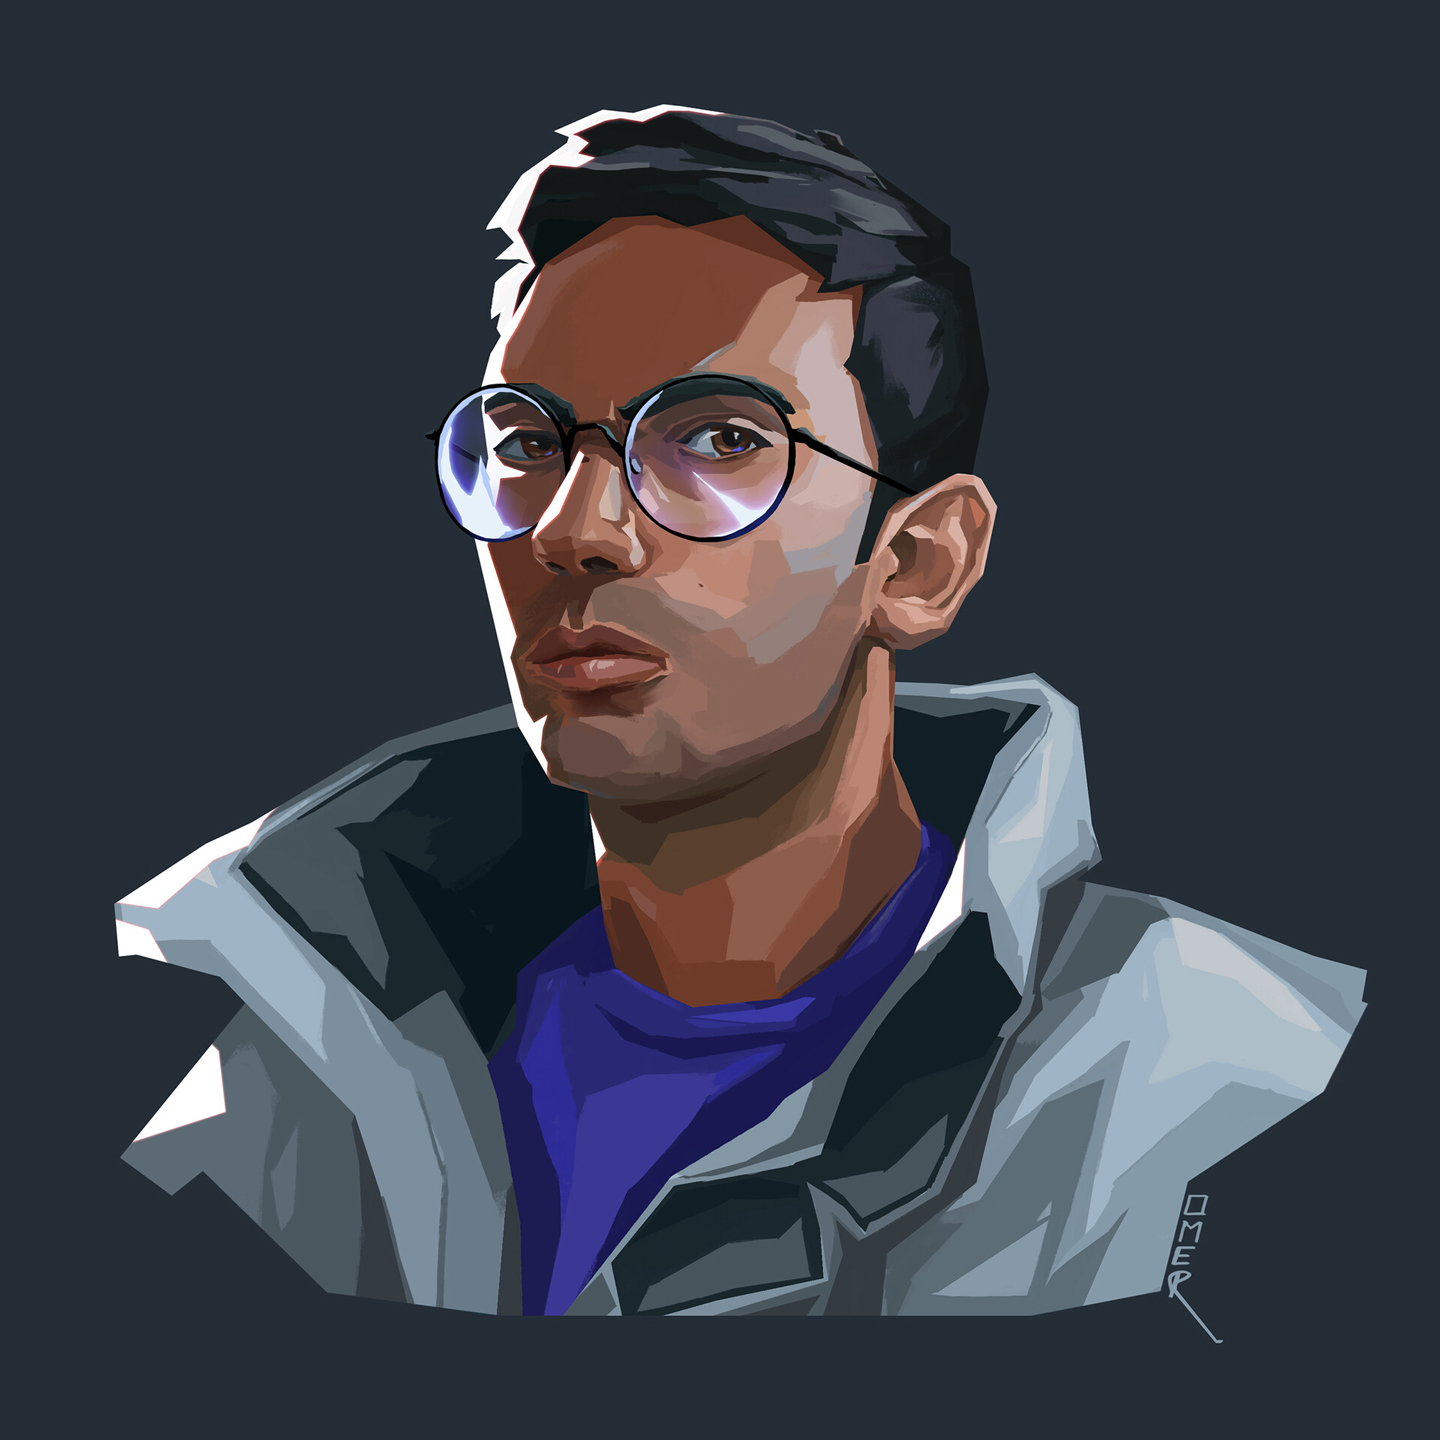 Self-Portrait painted in the style of VALORANT's splash arts